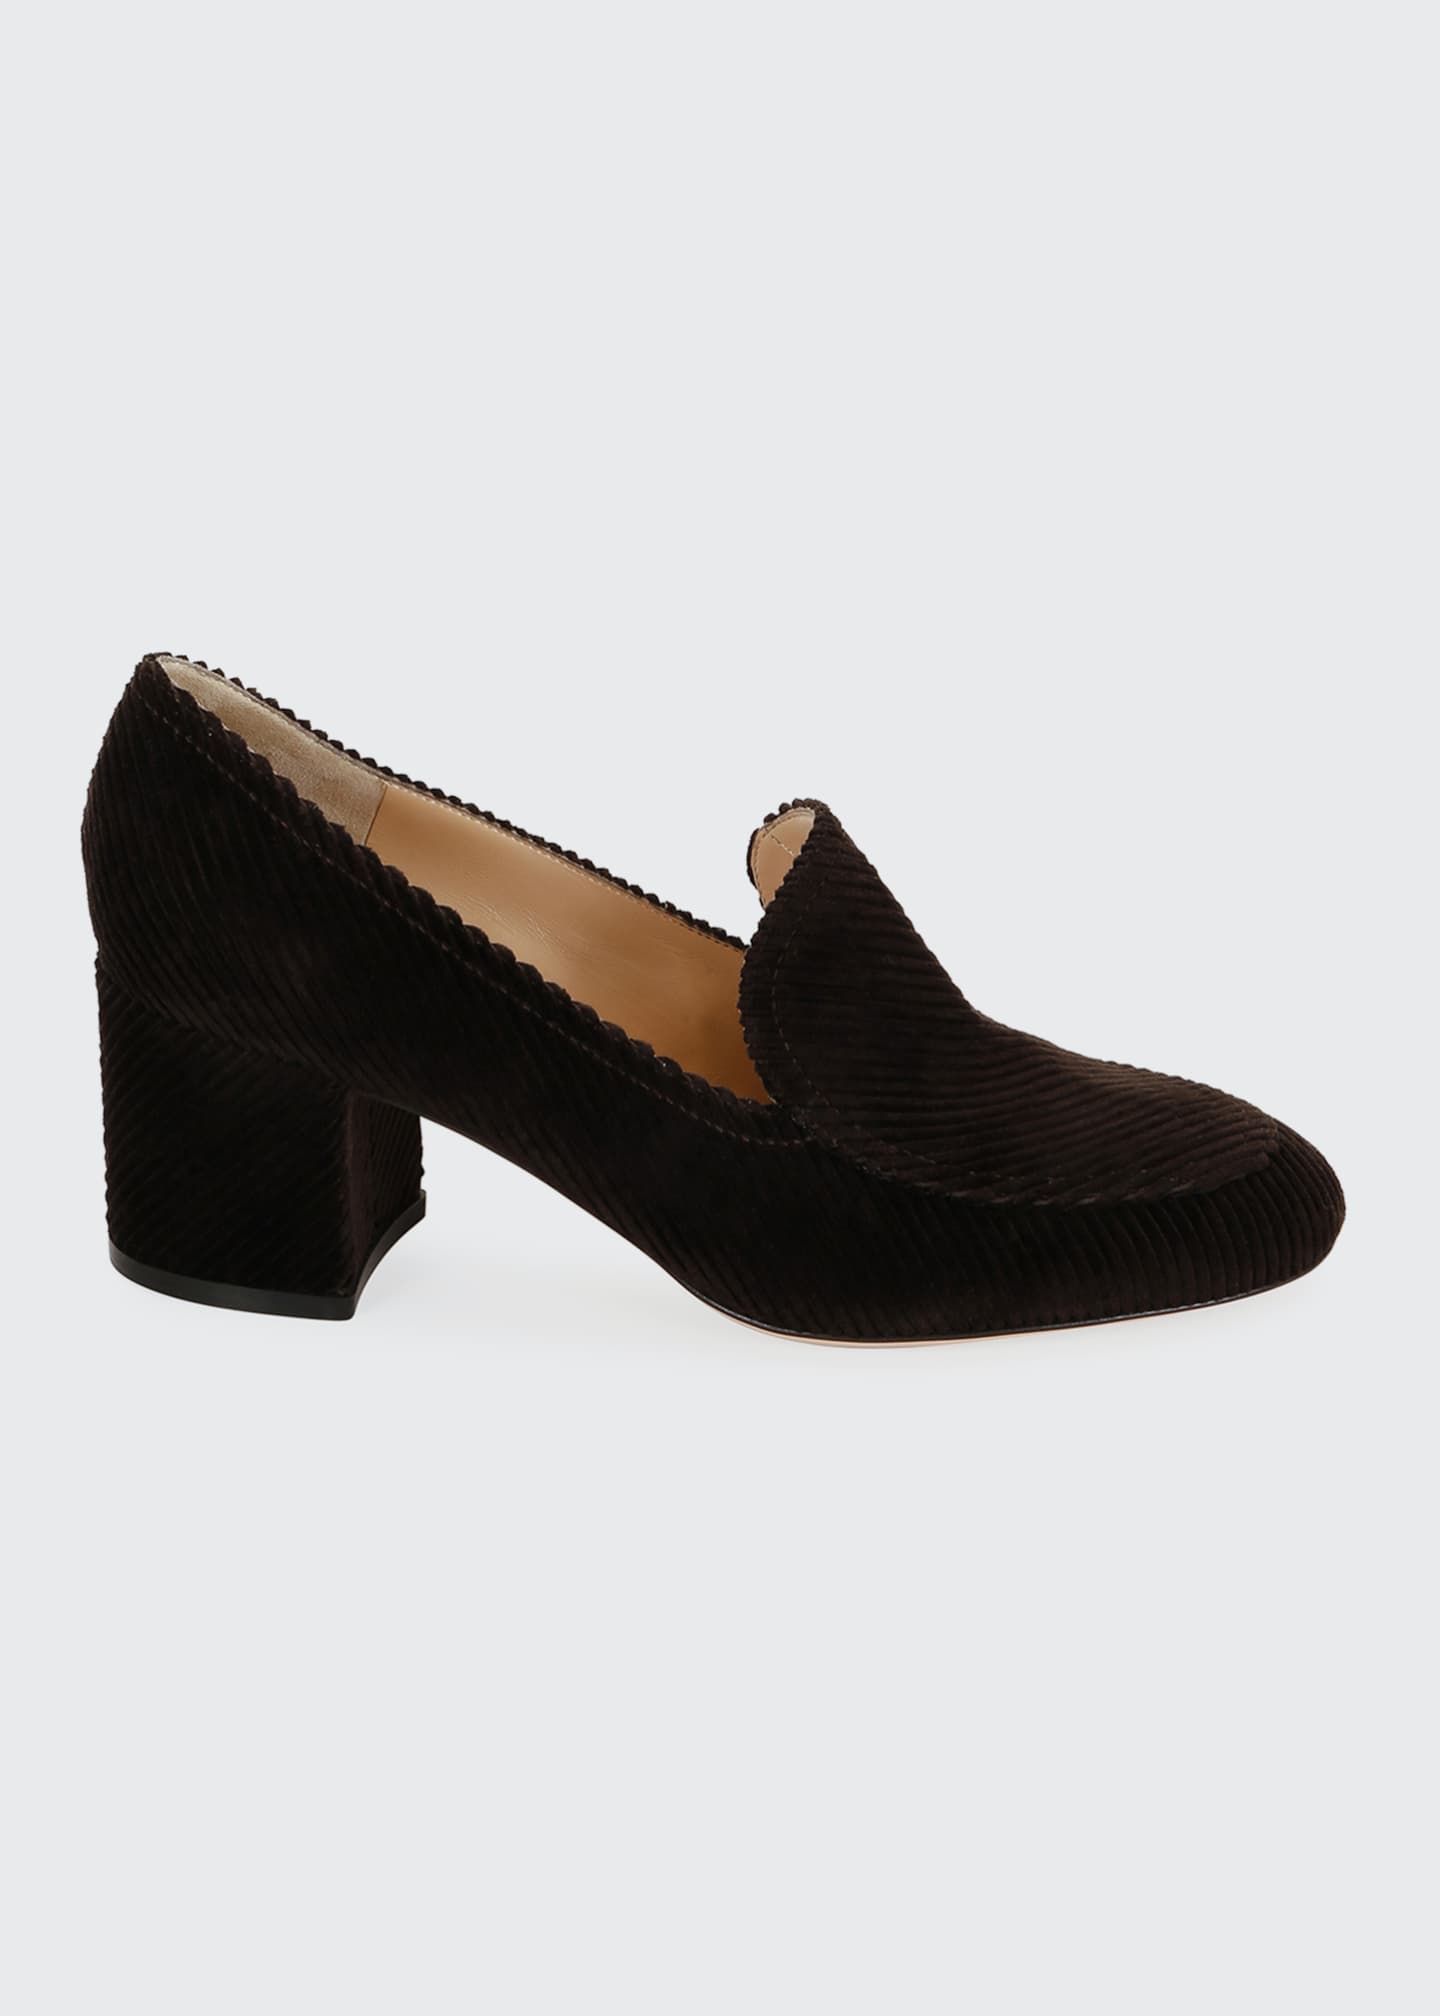 Gianvito Rossi Suede Pleated Loafer Pumps - Bergdorf Goodman